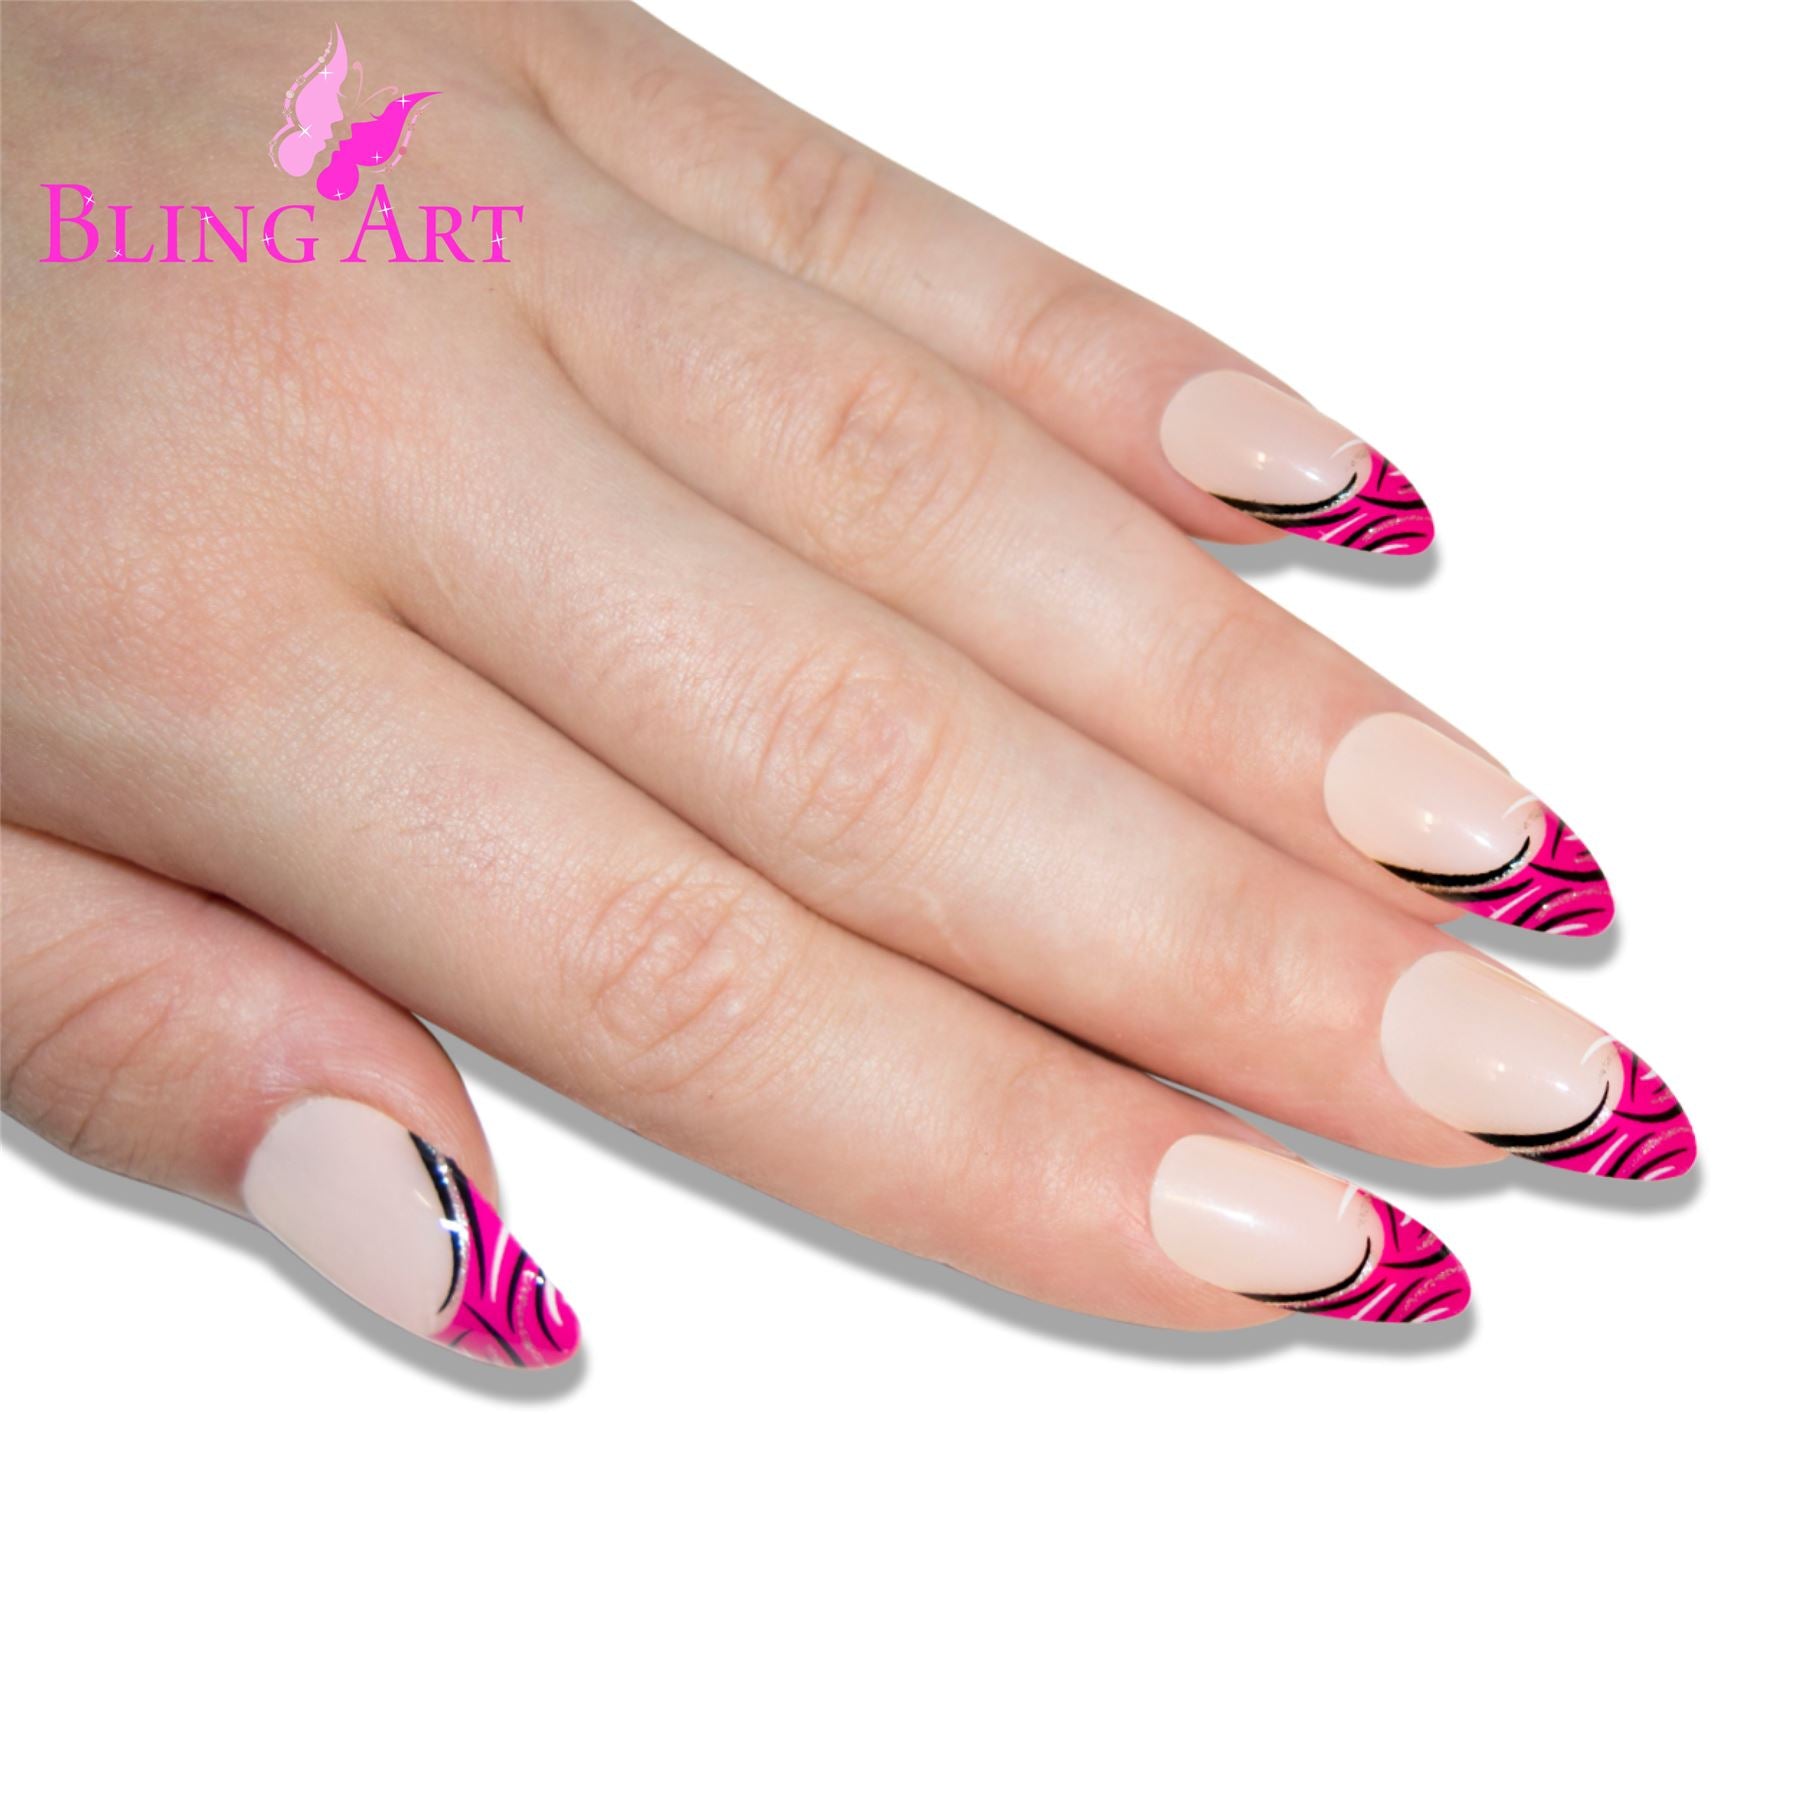 False Nails by Bling Art Glitter Pink 24 Almond Stiletto Long Fake Tips with Glue